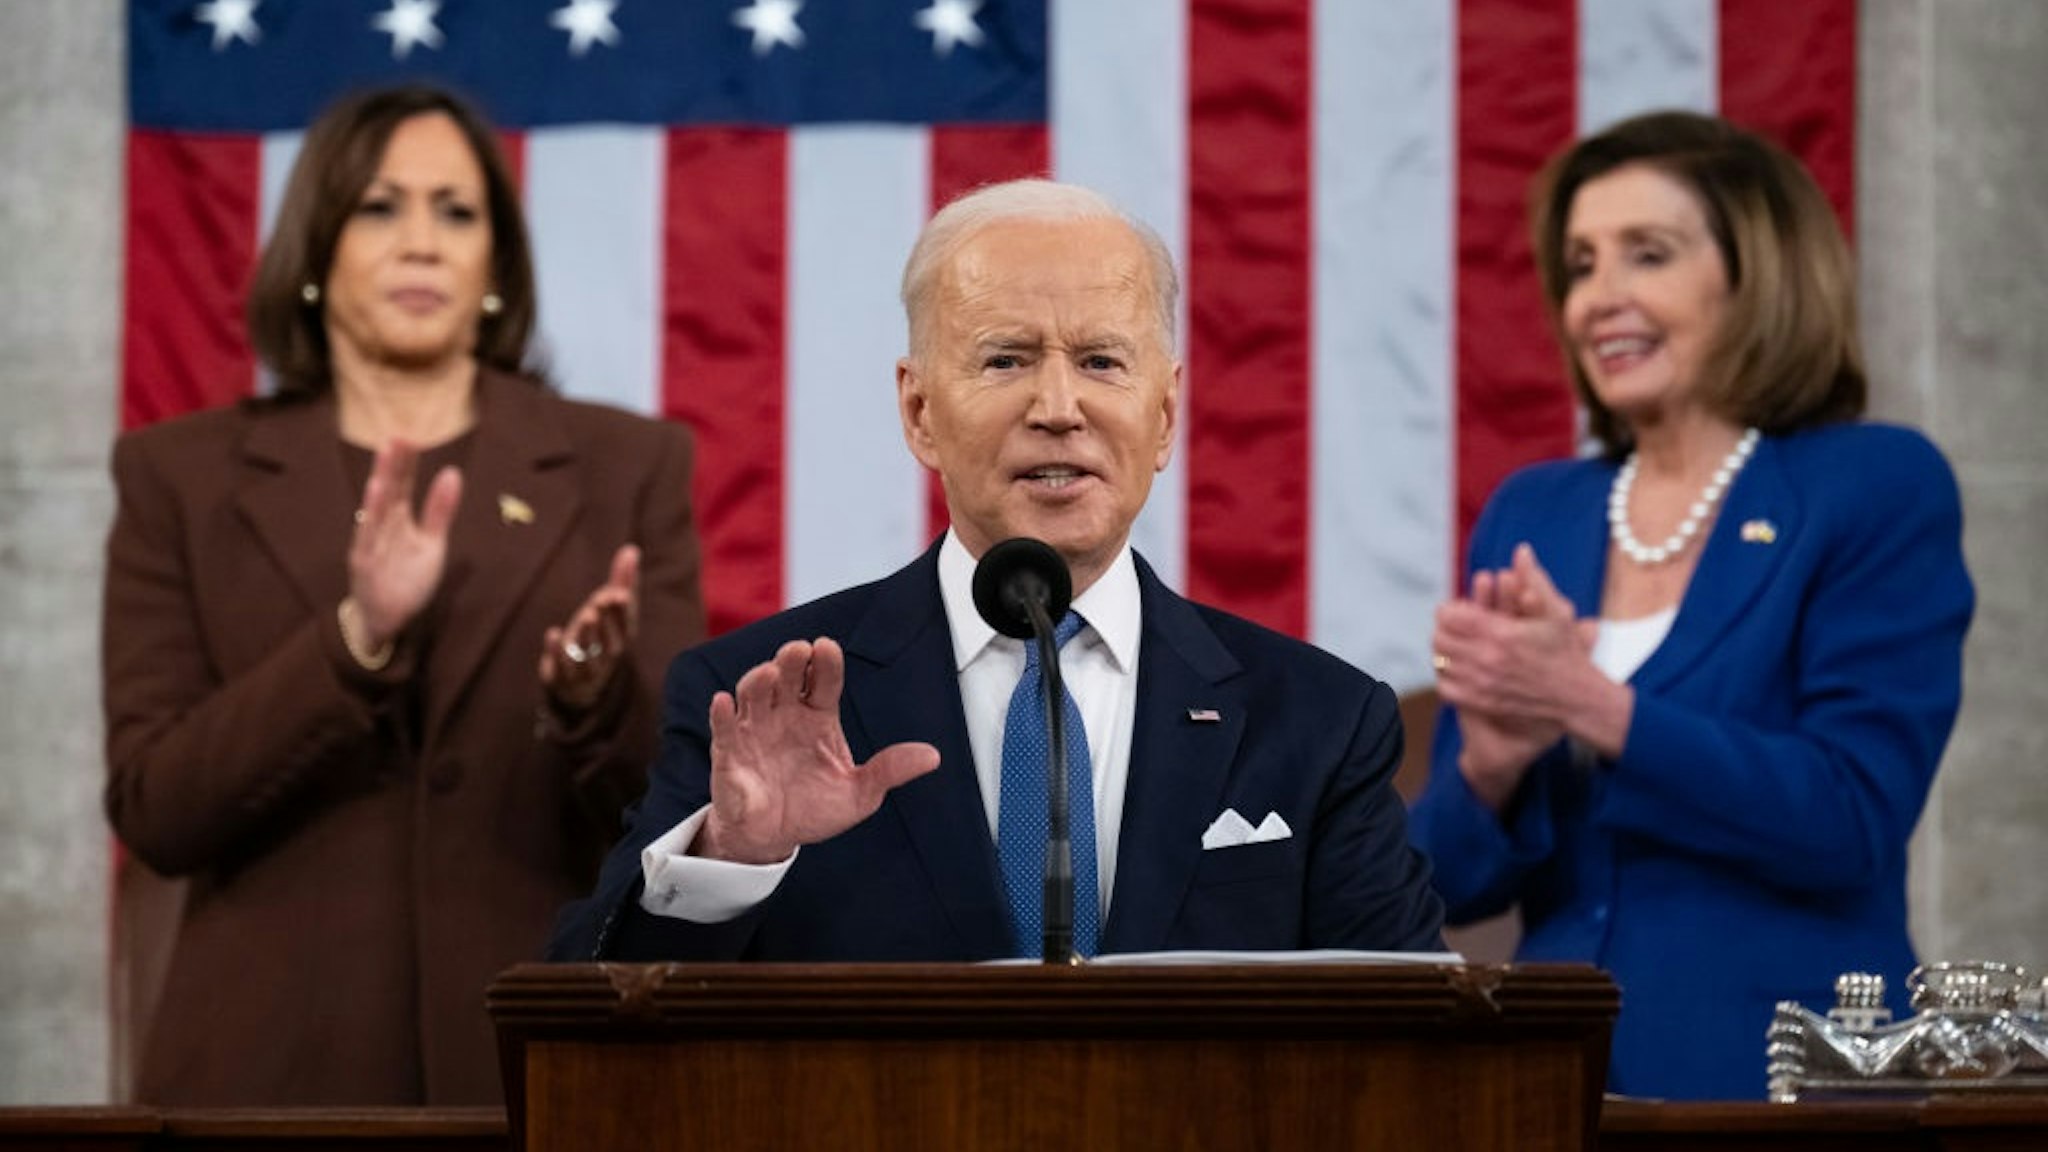 WASHINGTON, DC - MARCH 01: U.S. President Joe Biden delivers the State of the Union address to a joint session of Congress in the U.S. Capitol House Chamber on March 1, 2022 in Washington, DC.